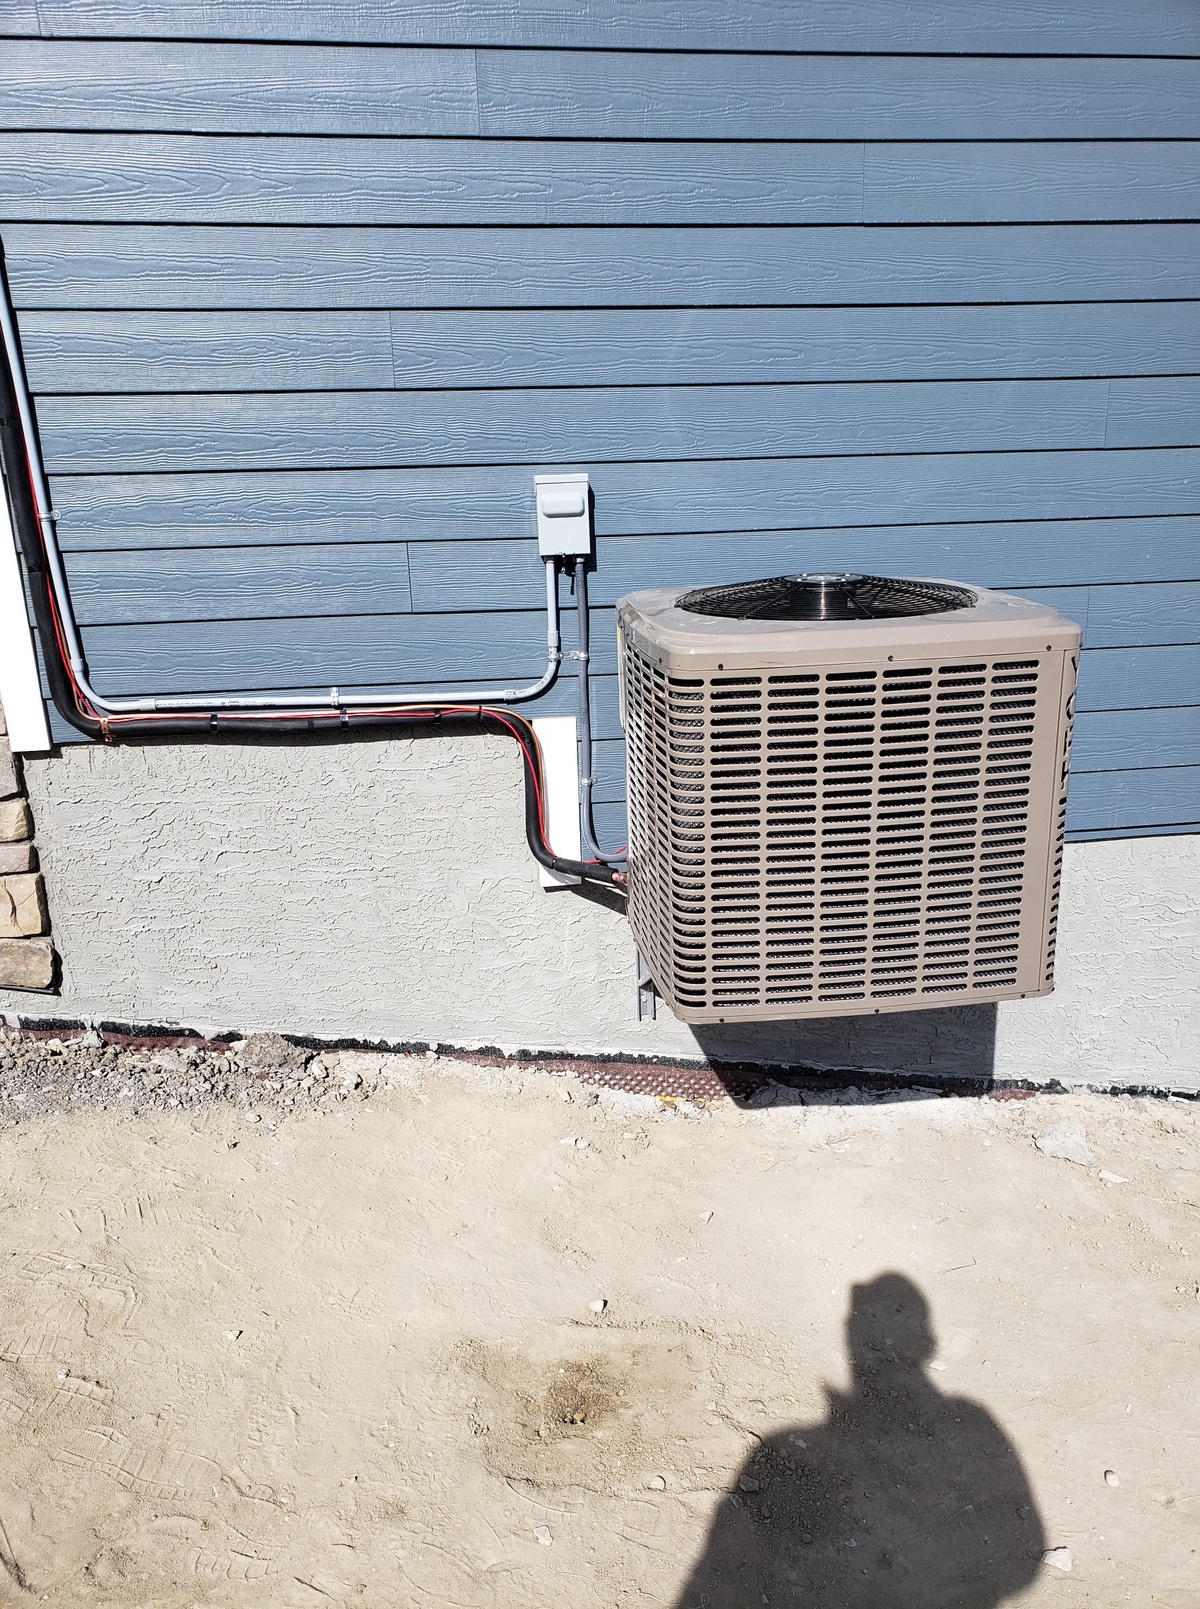 How can air conditioning systems improve indoor air quality?